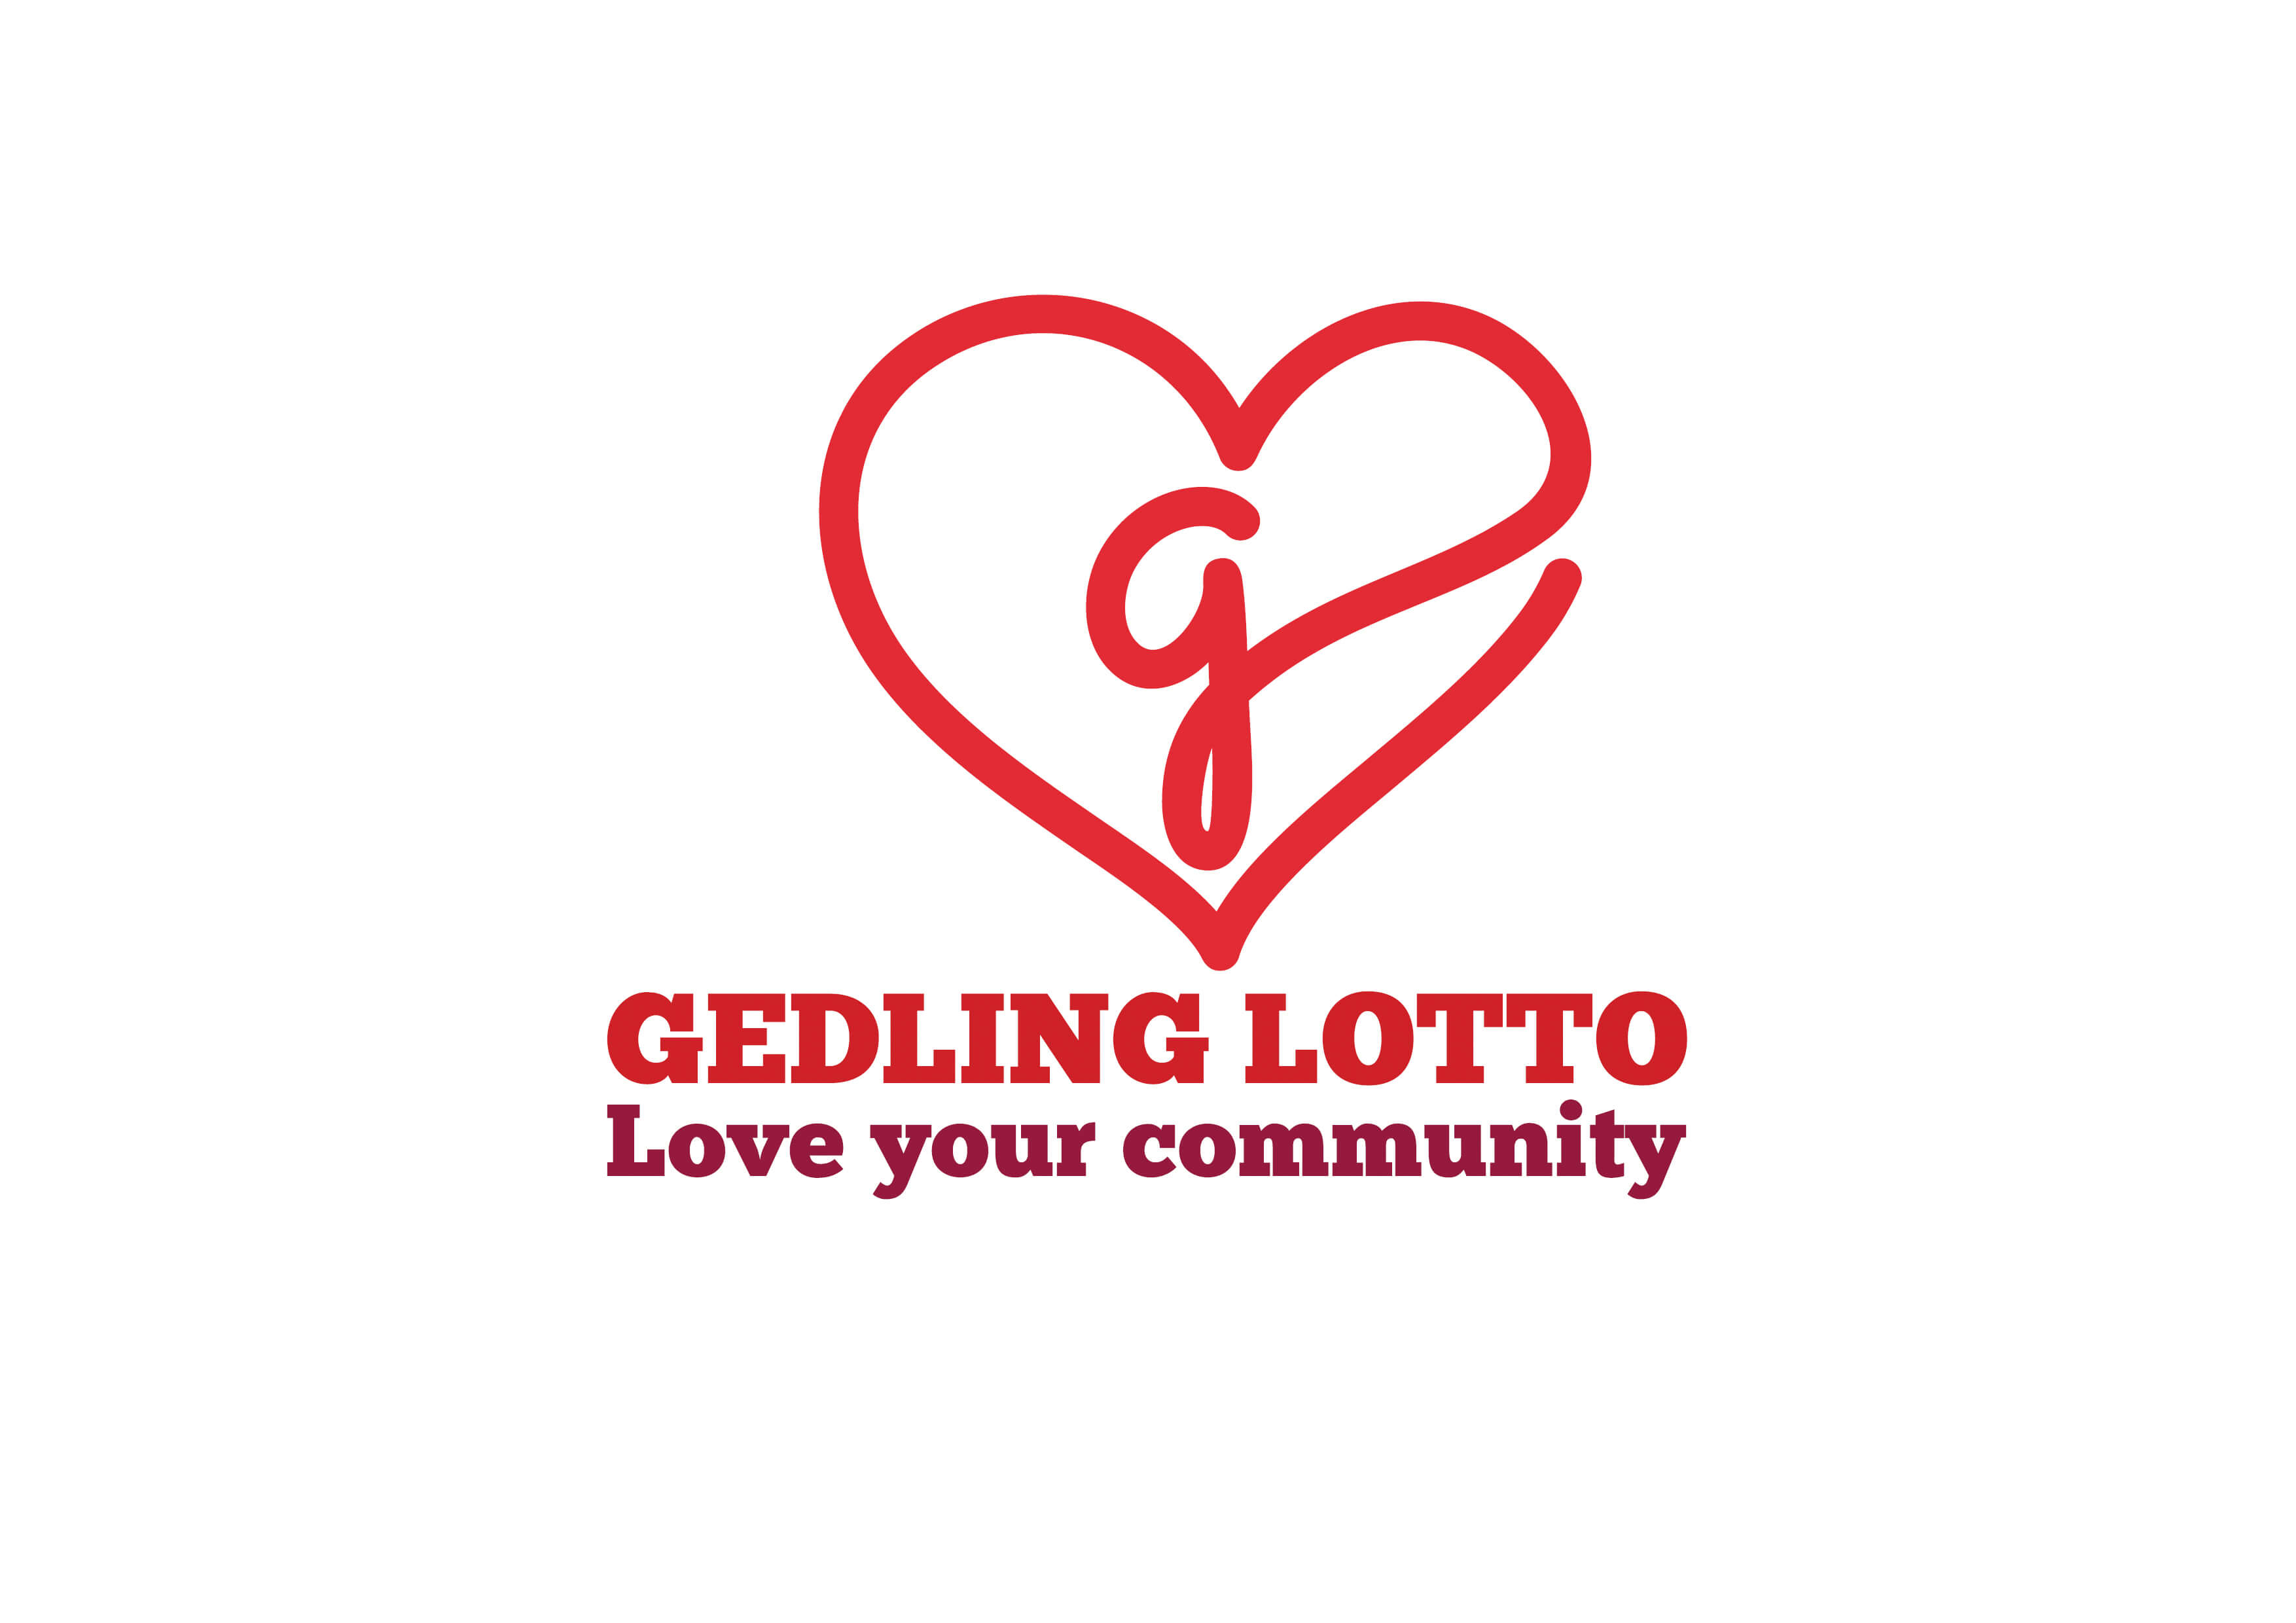 A logo containing a heart and the text Gedling Lotto